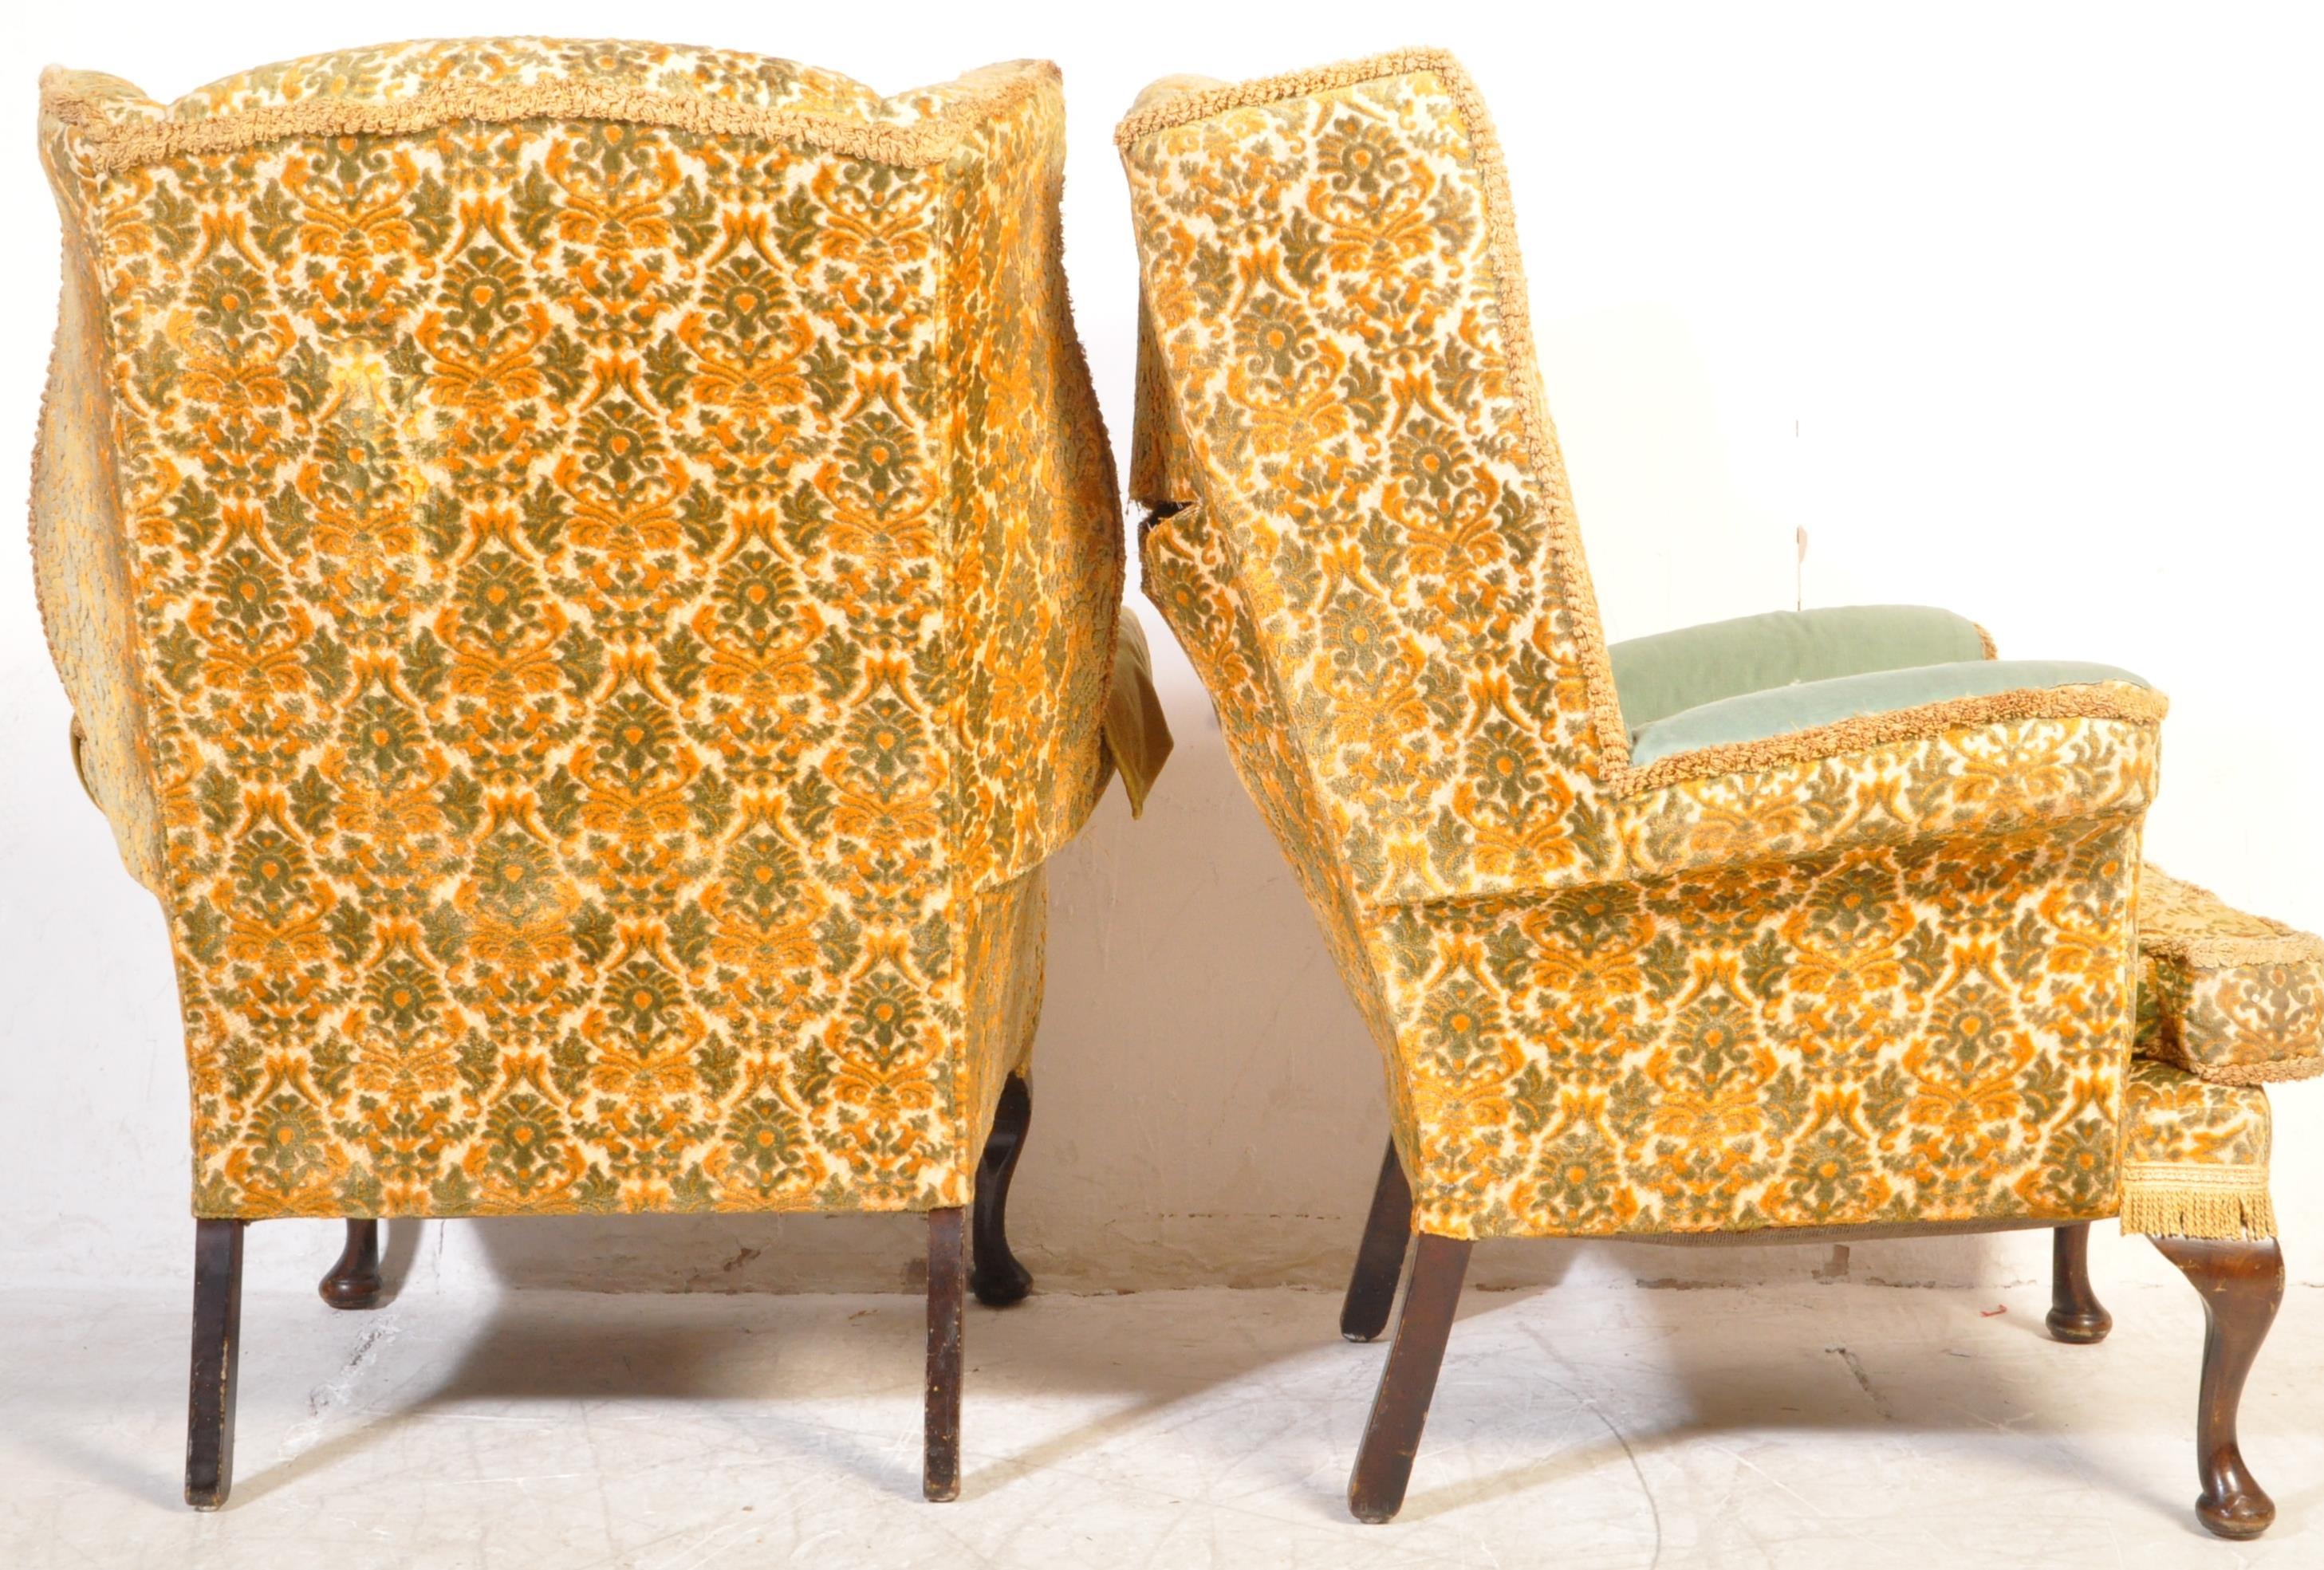 PAIR OF EARLY 20TH CENTURY WING BACK ARMCHAIRS - Image 4 of 6